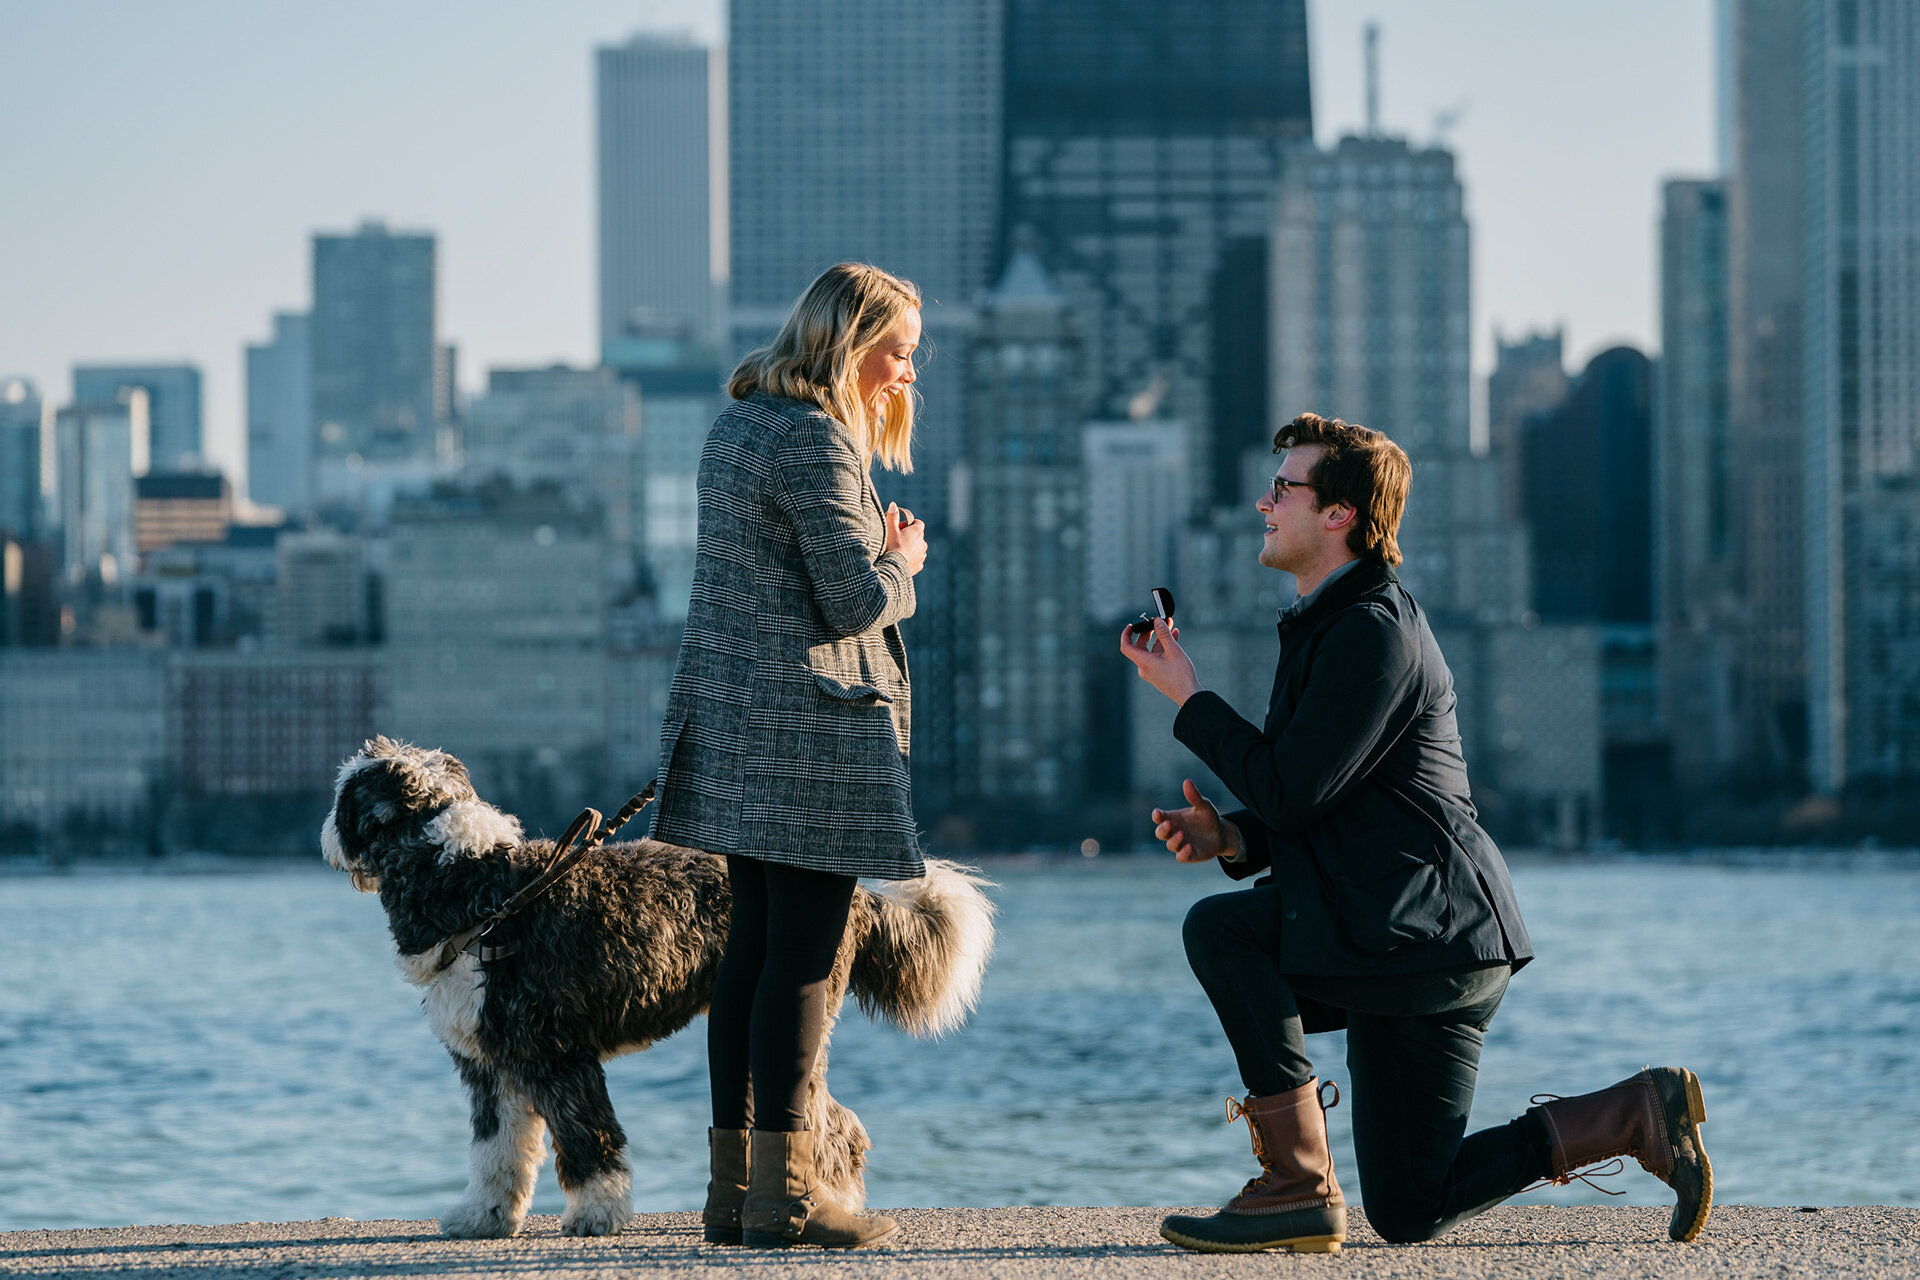 North Avenue Beach proposal with Chicago skyline in background